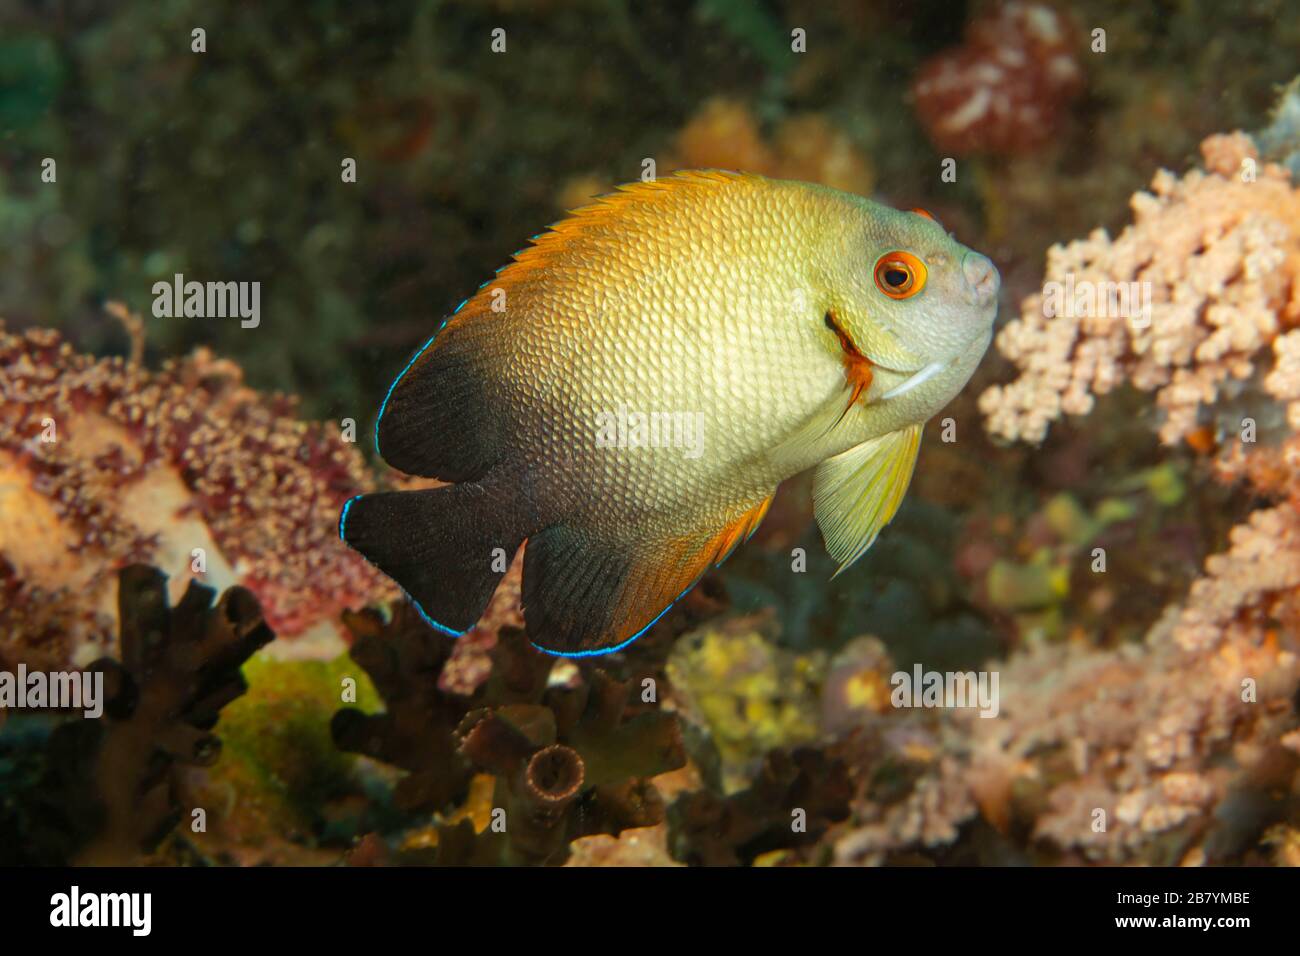 A pearlscale angelfish or half black angelfish, Centropyge vrolikii, on a reef, Philippines. Stock Photo